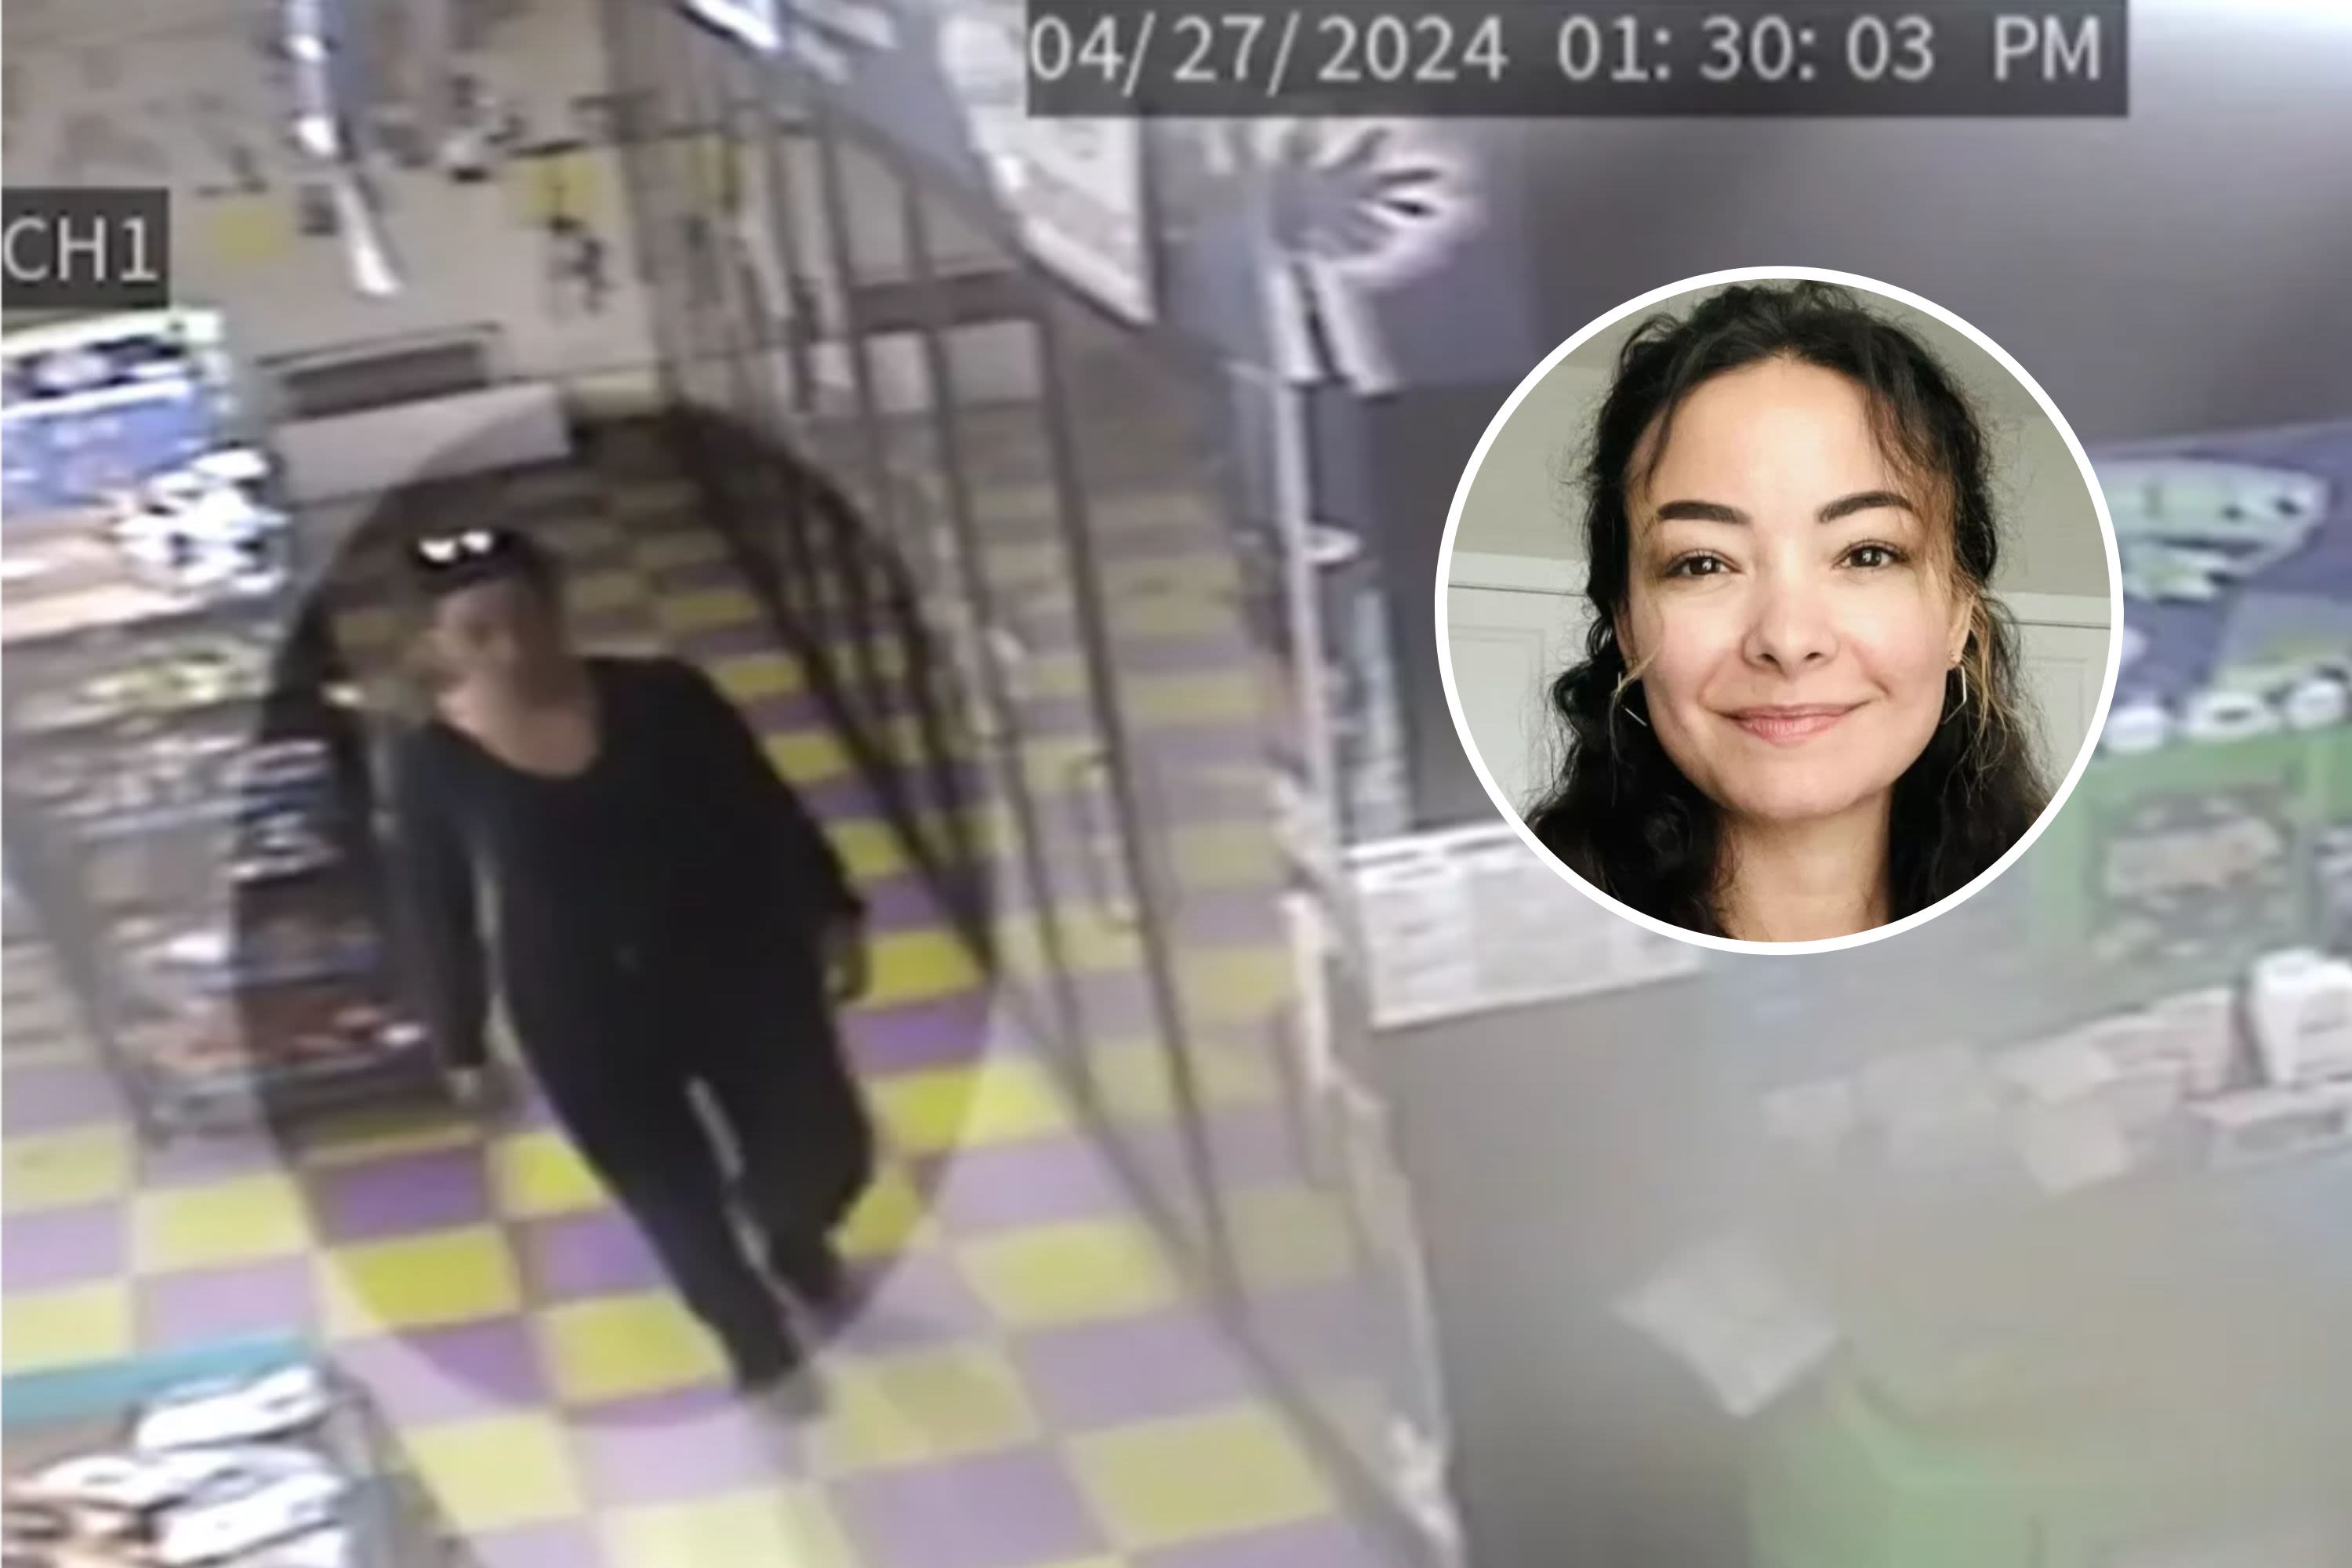 Mica Miller update: Gas station owner has video of woman before her death